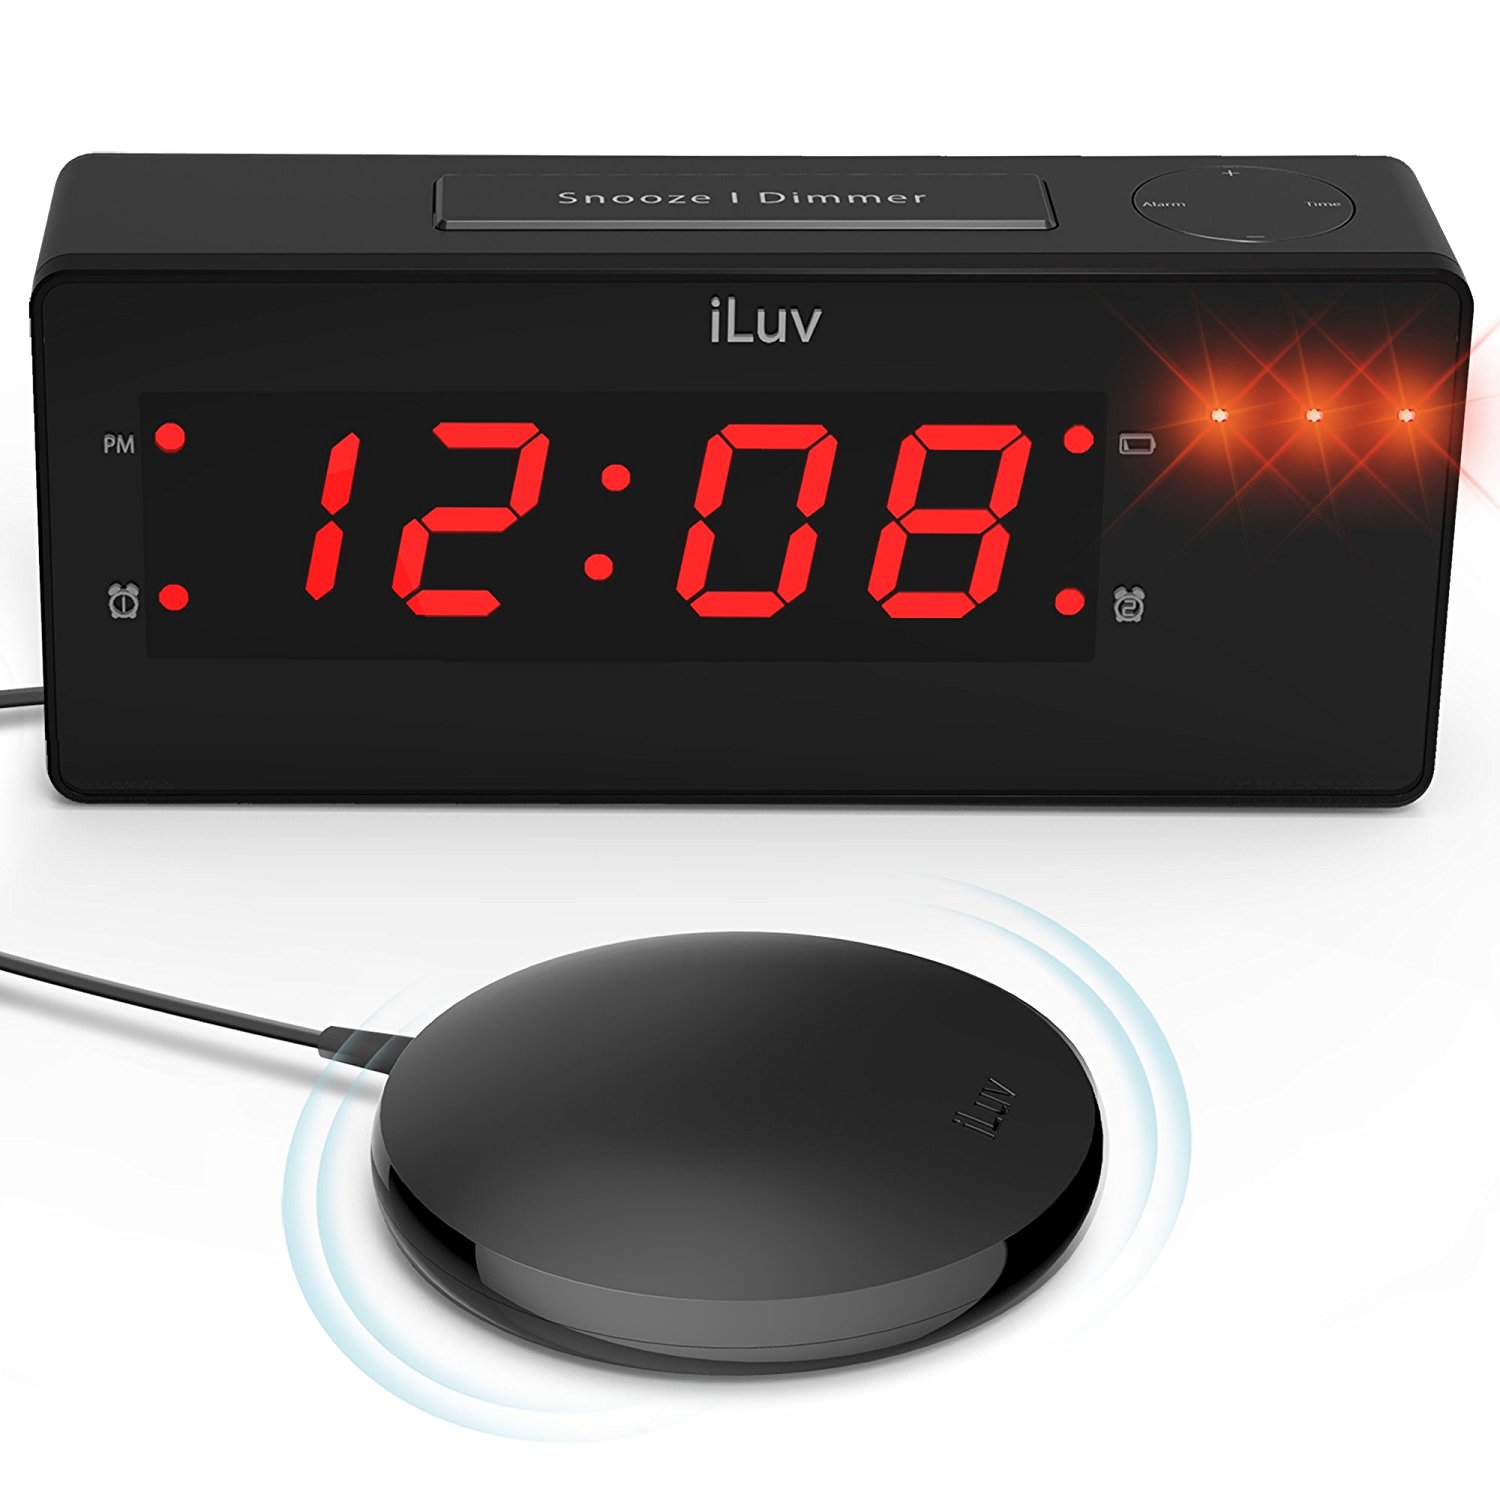 iLuv – 1.4" Jumbo LED Dual Alarm Clock with Super Vibrating Wired Bed Shaker, 120 dB Panic Sound, and Built-In 3 LED Alert Light